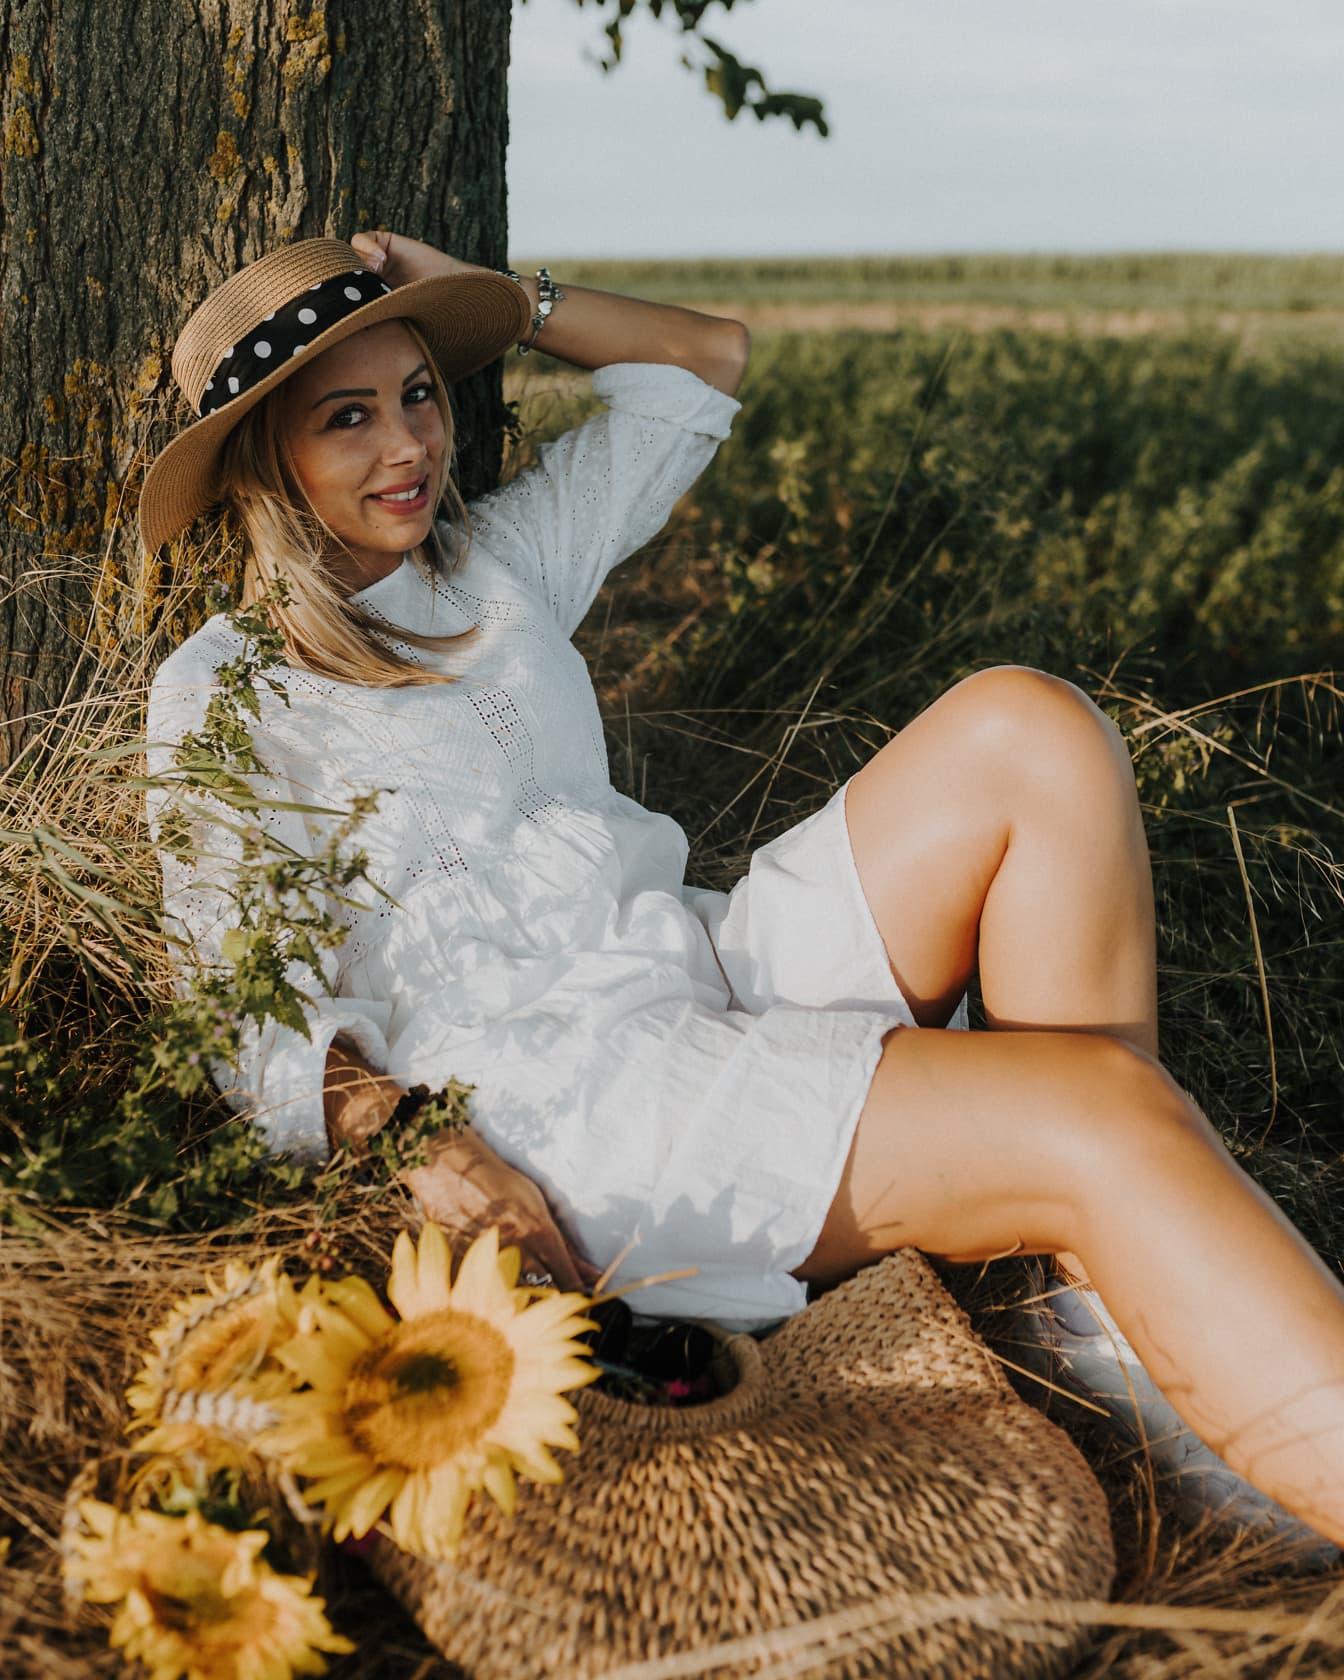 Pretty countryside cowgirl sitting in a field in white dress and straw hat